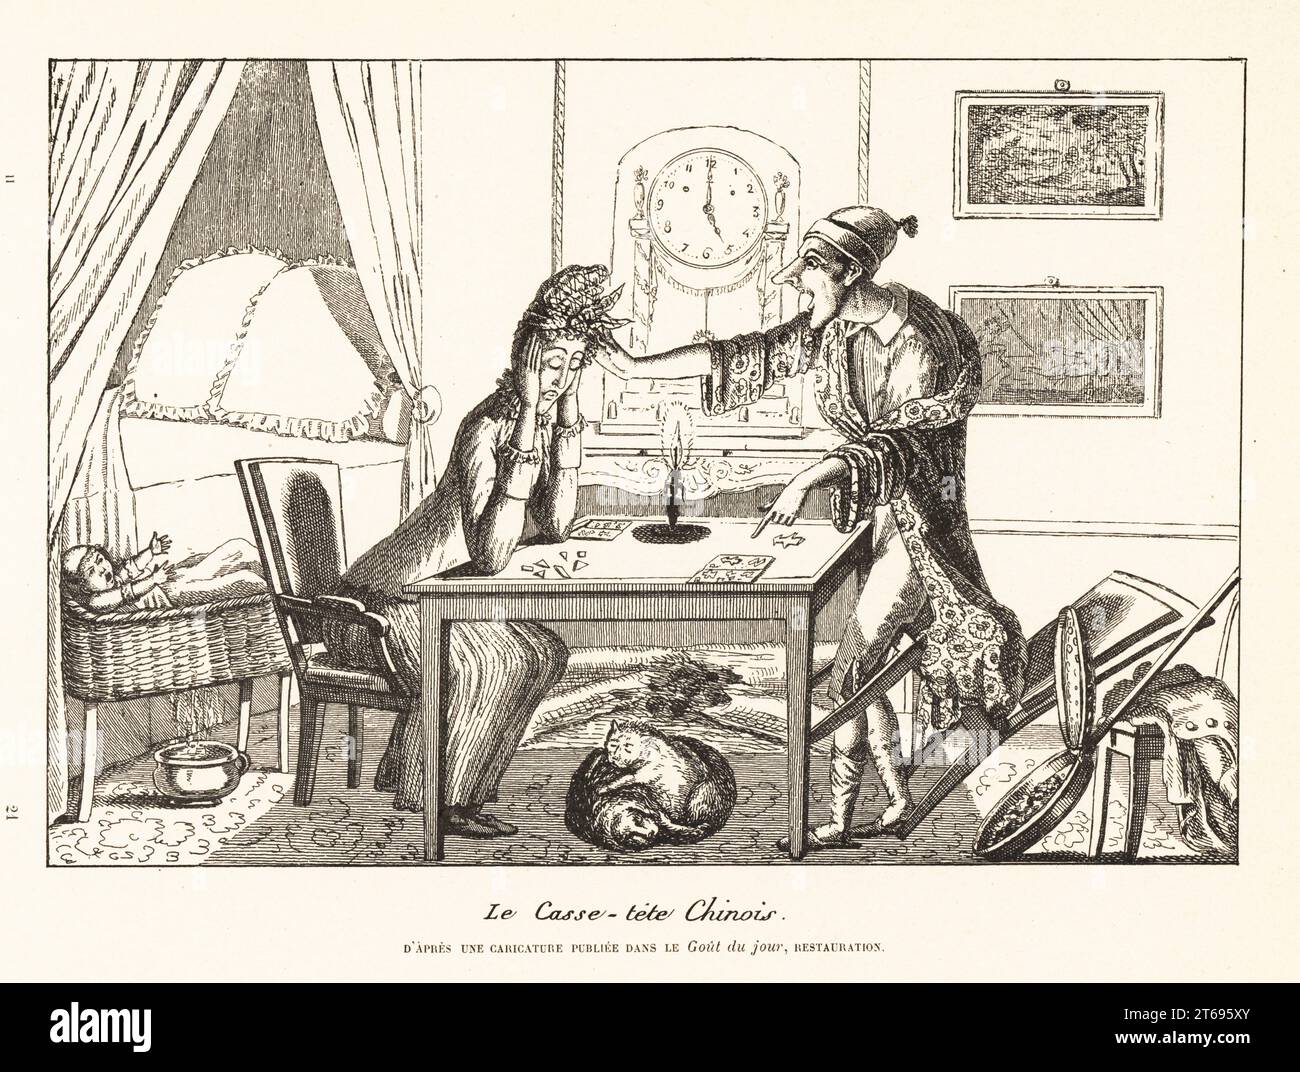 A woman playing a Tangram or Chinese puzzle game, 1818. A husband berates a wife addicted to the gamt, ignoring the baby crying in its cot. The game sparked a craze in the early 19th century. Le casse-tete Chinois. Lithograph from Henry Rene dAllemagnes Recreations et Passe-Temps, Games and Pastimes, Hachette, Paris, 1906. Stock Photo